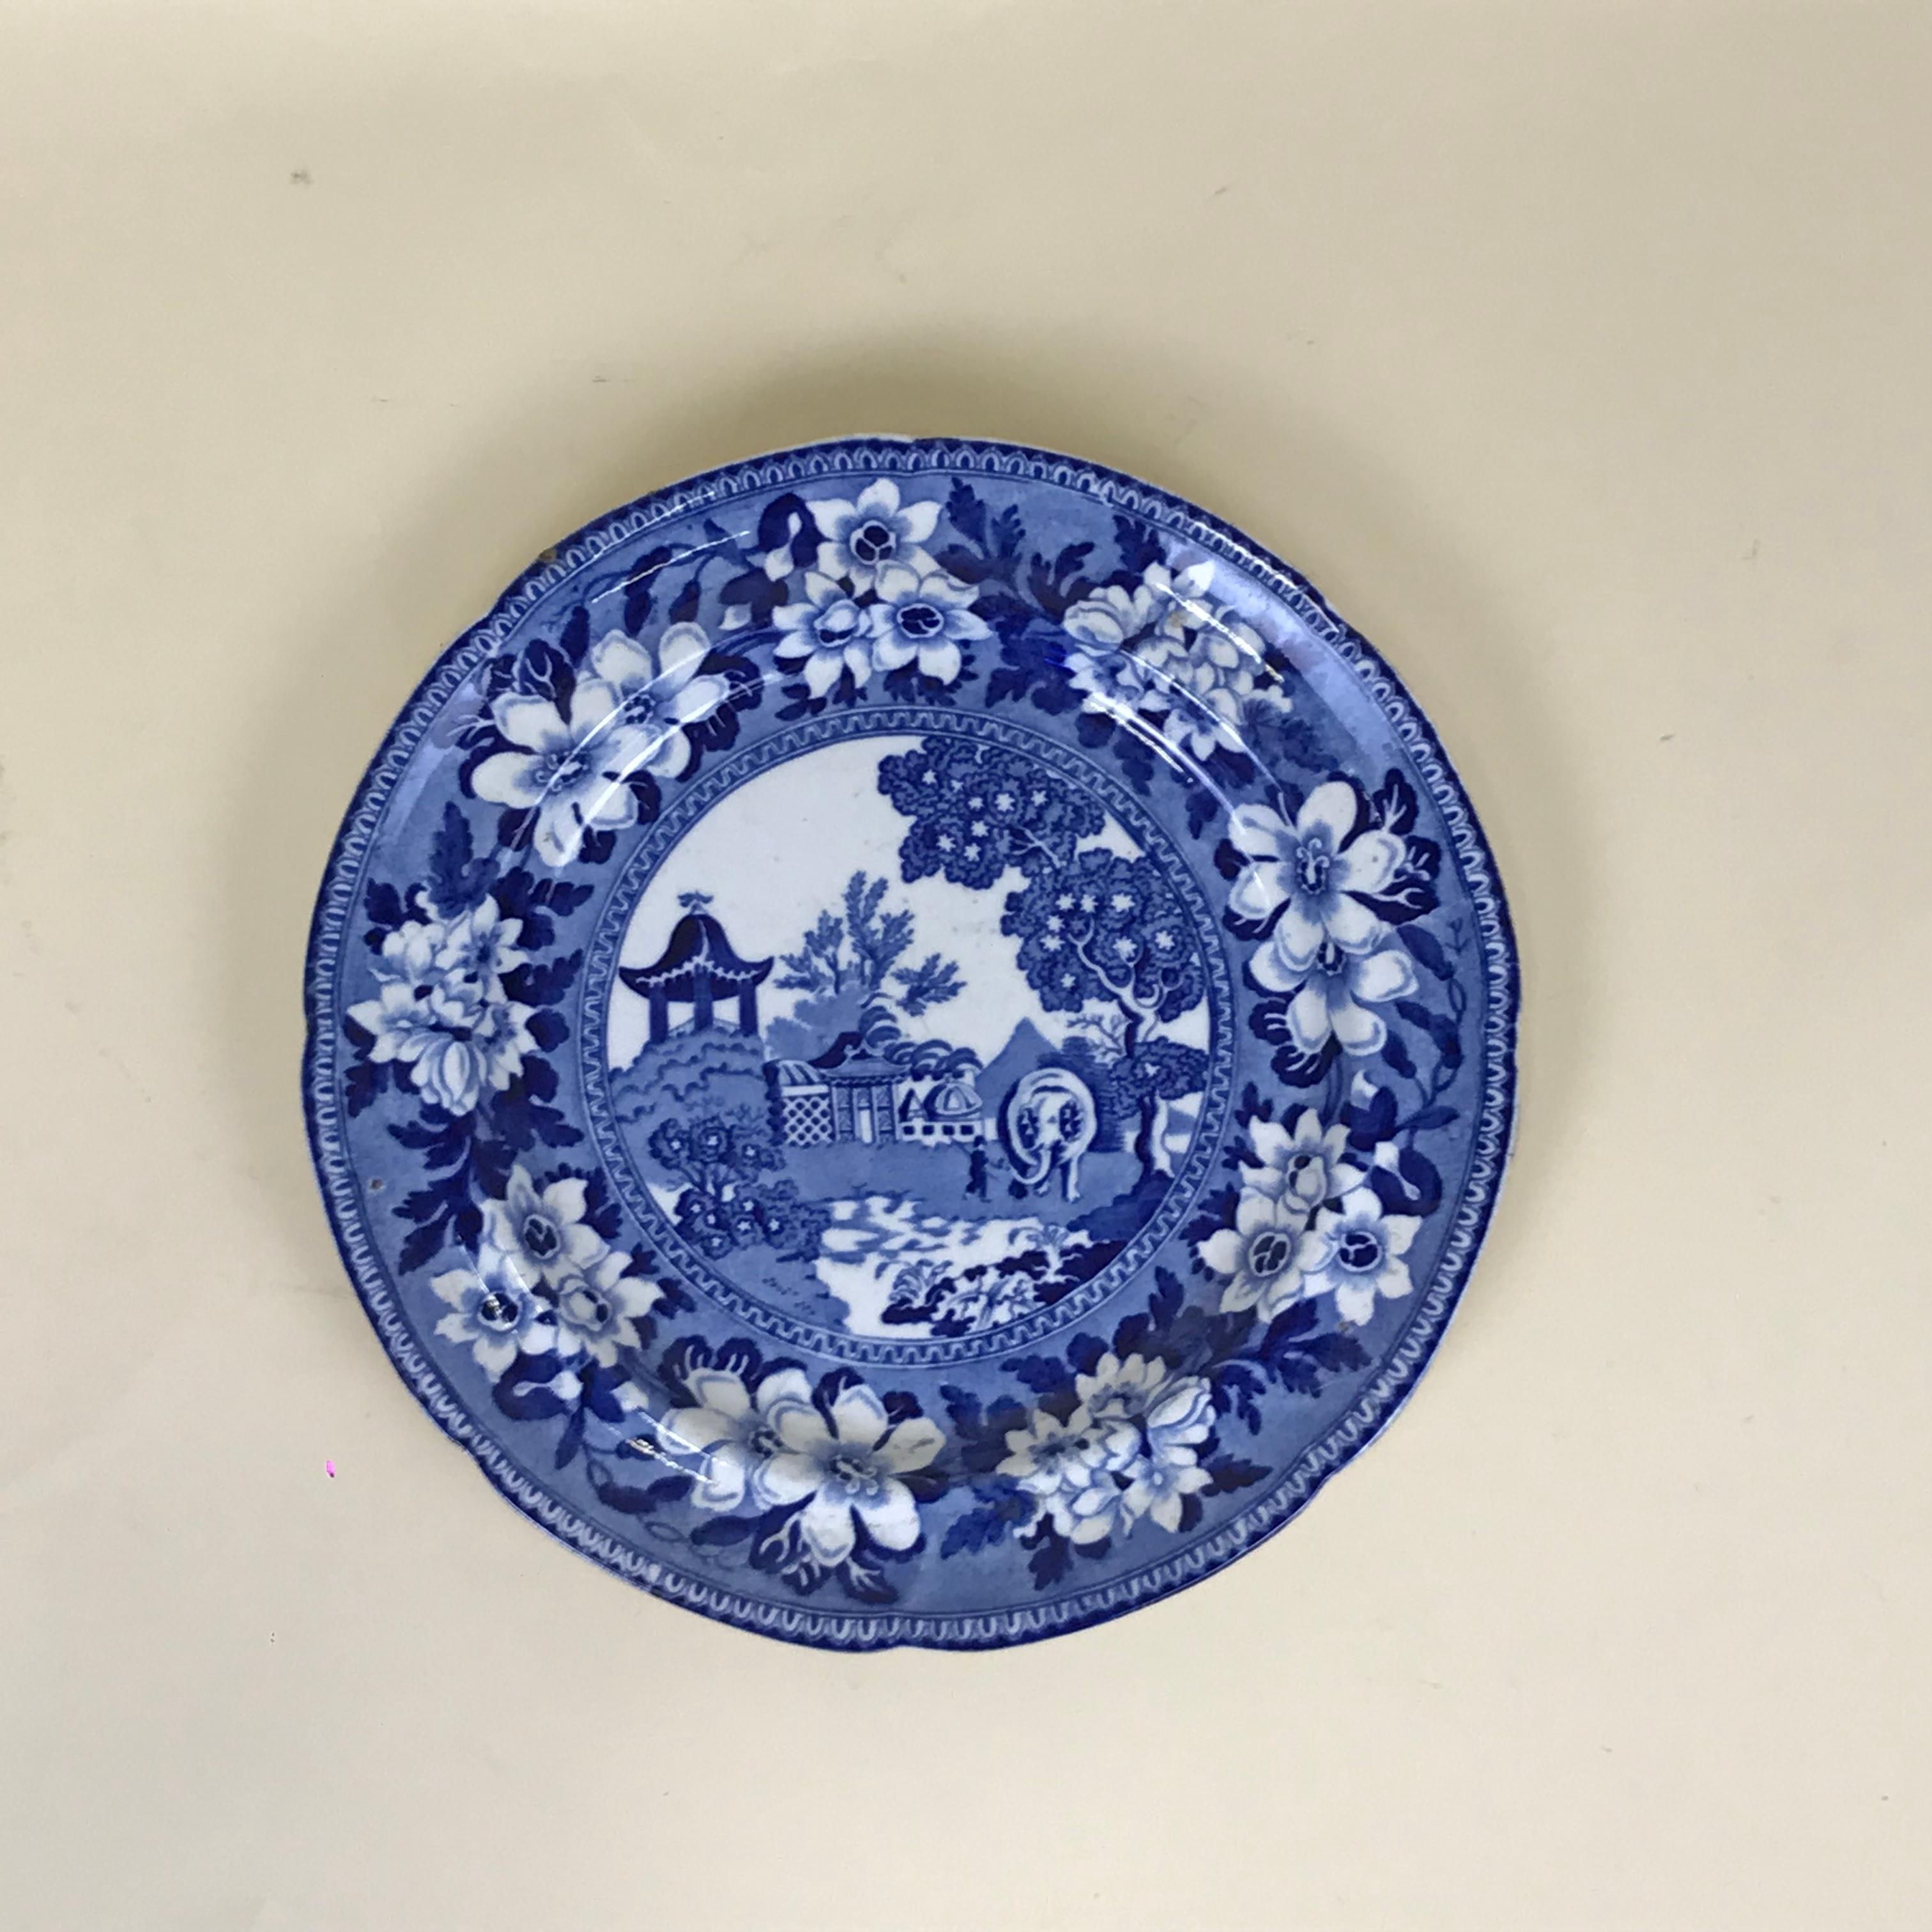 Early 19th century antique english georgian blue and white transfer dinner plate printed in the 